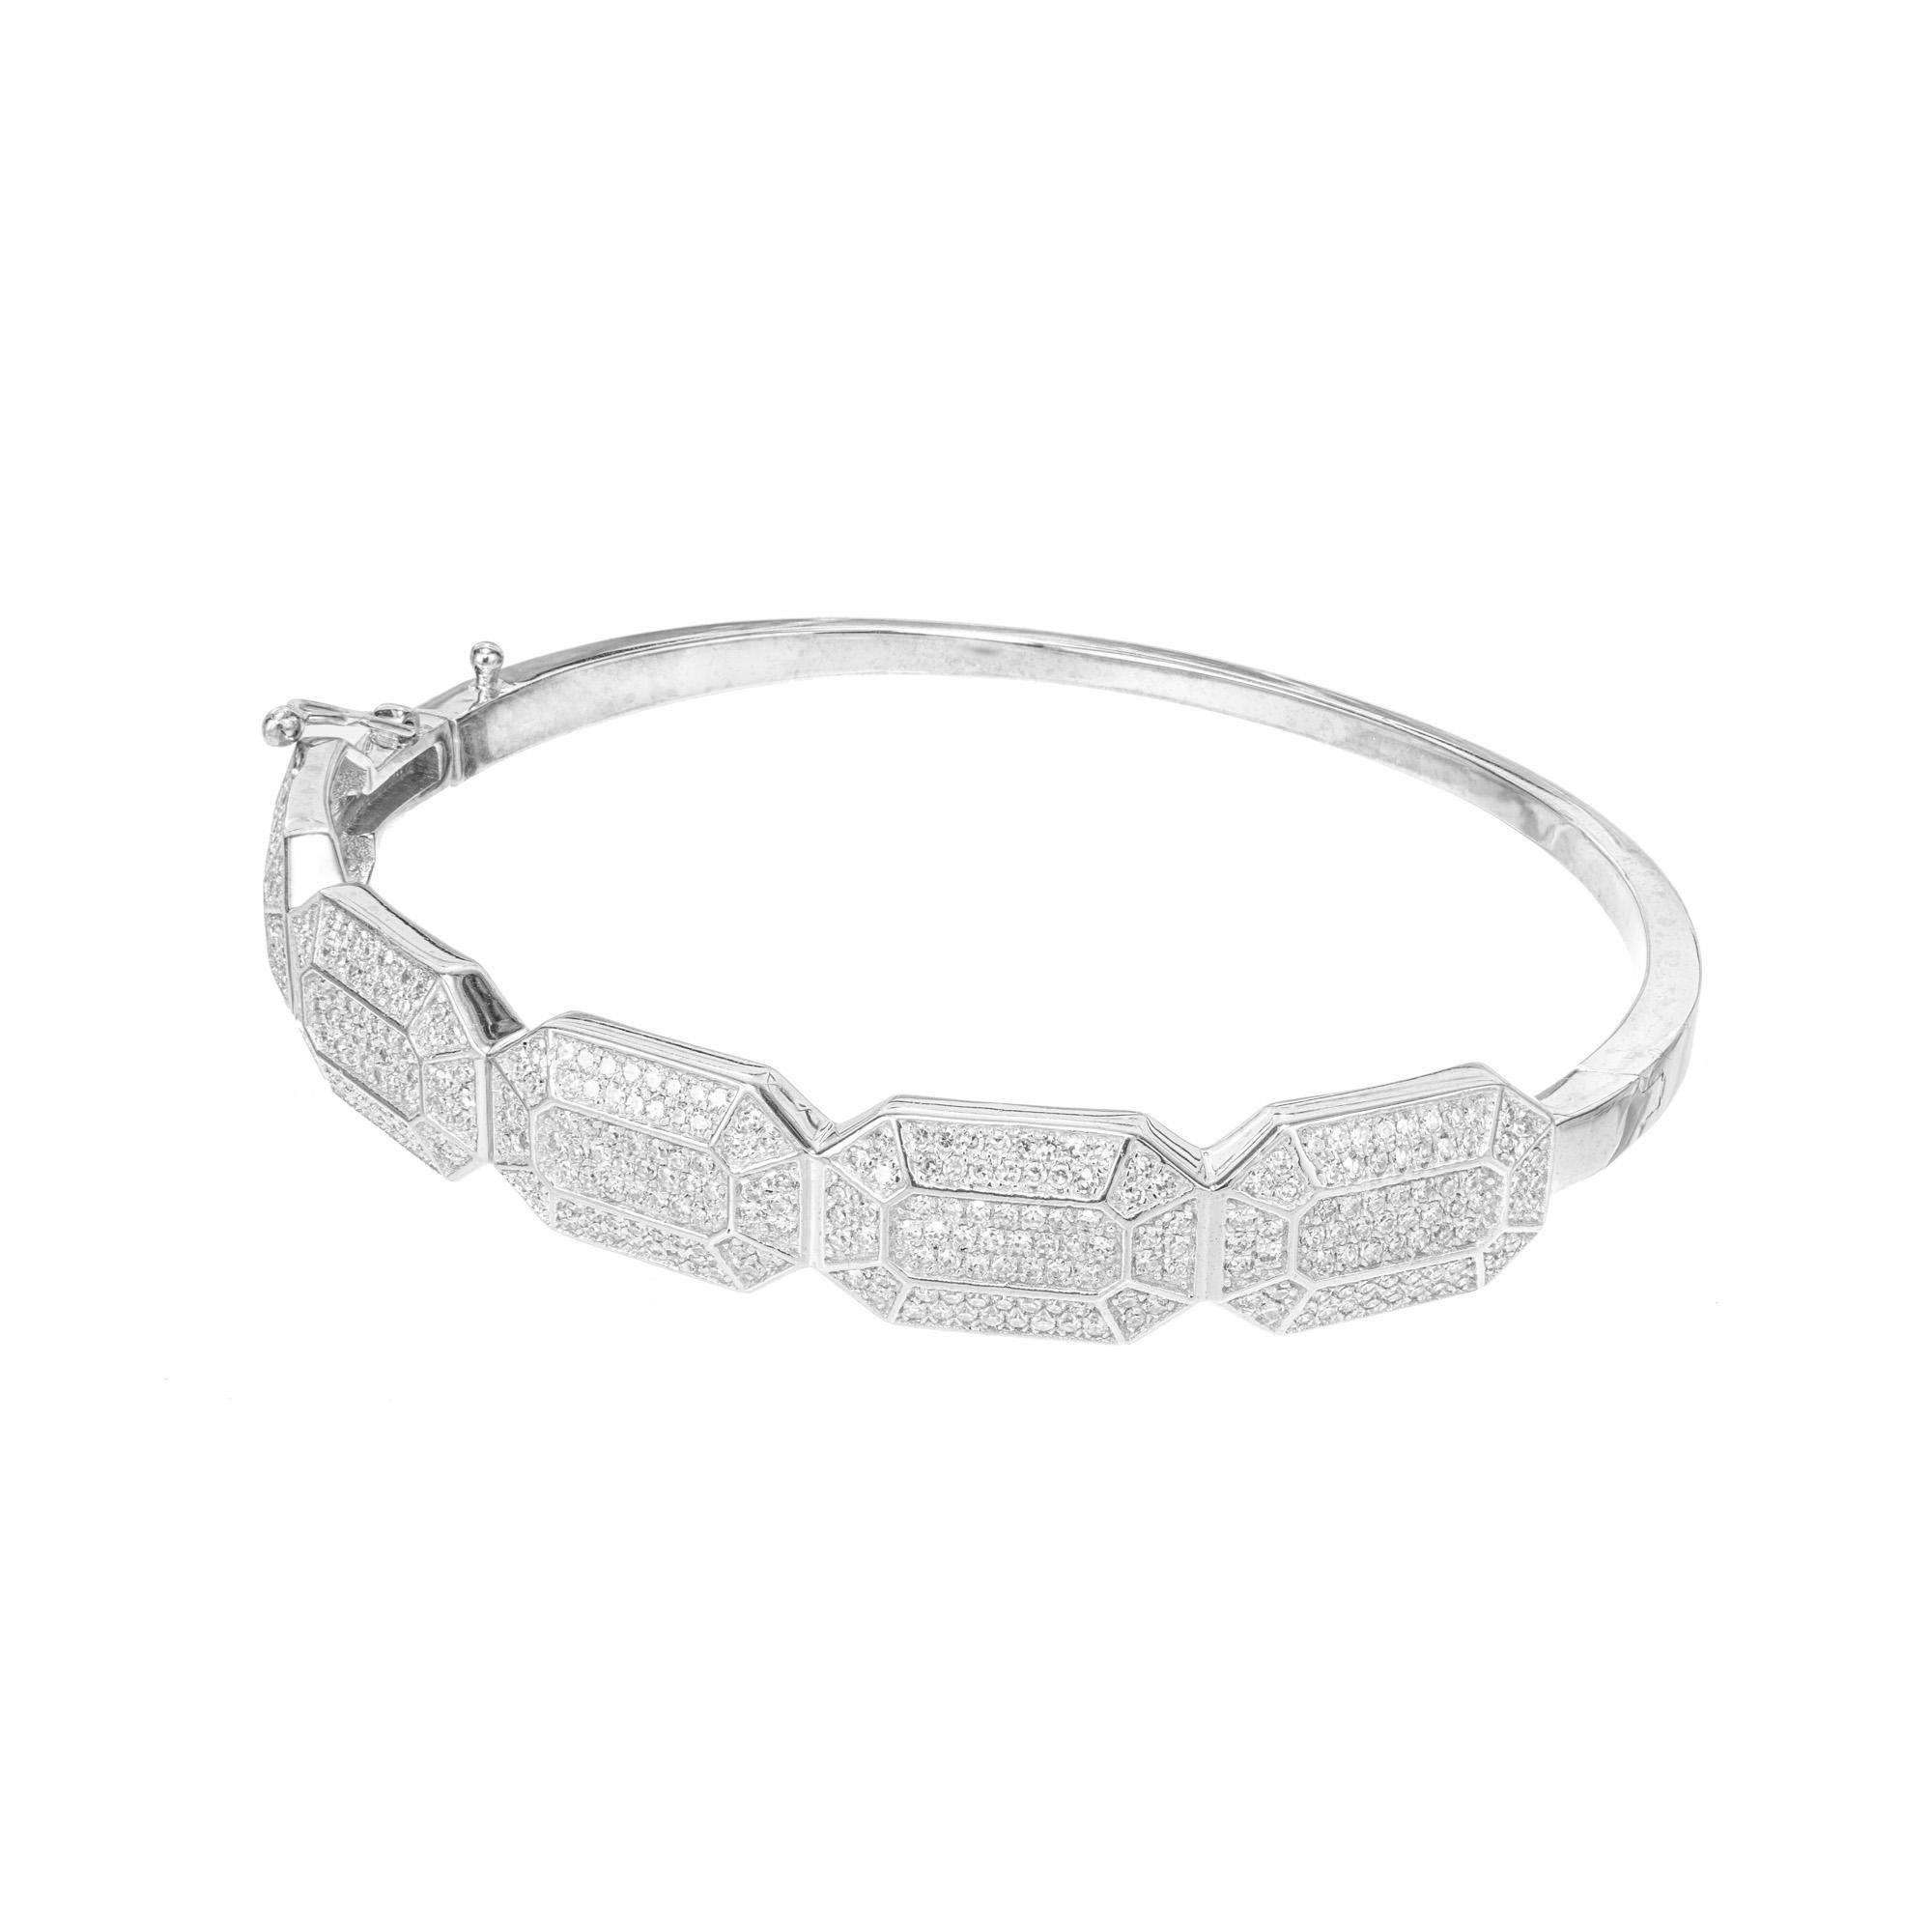 Art Deco Inspired diamond bangle bracelet. This 14k white gold bangle bracelet is set with 370 pave set diamonds, in five octagonal geometric sections. Fits a 7 -7.5 wrist 

370 single cut diamonds, G SI approx. 1.80cts
14k white gold
Stamped: